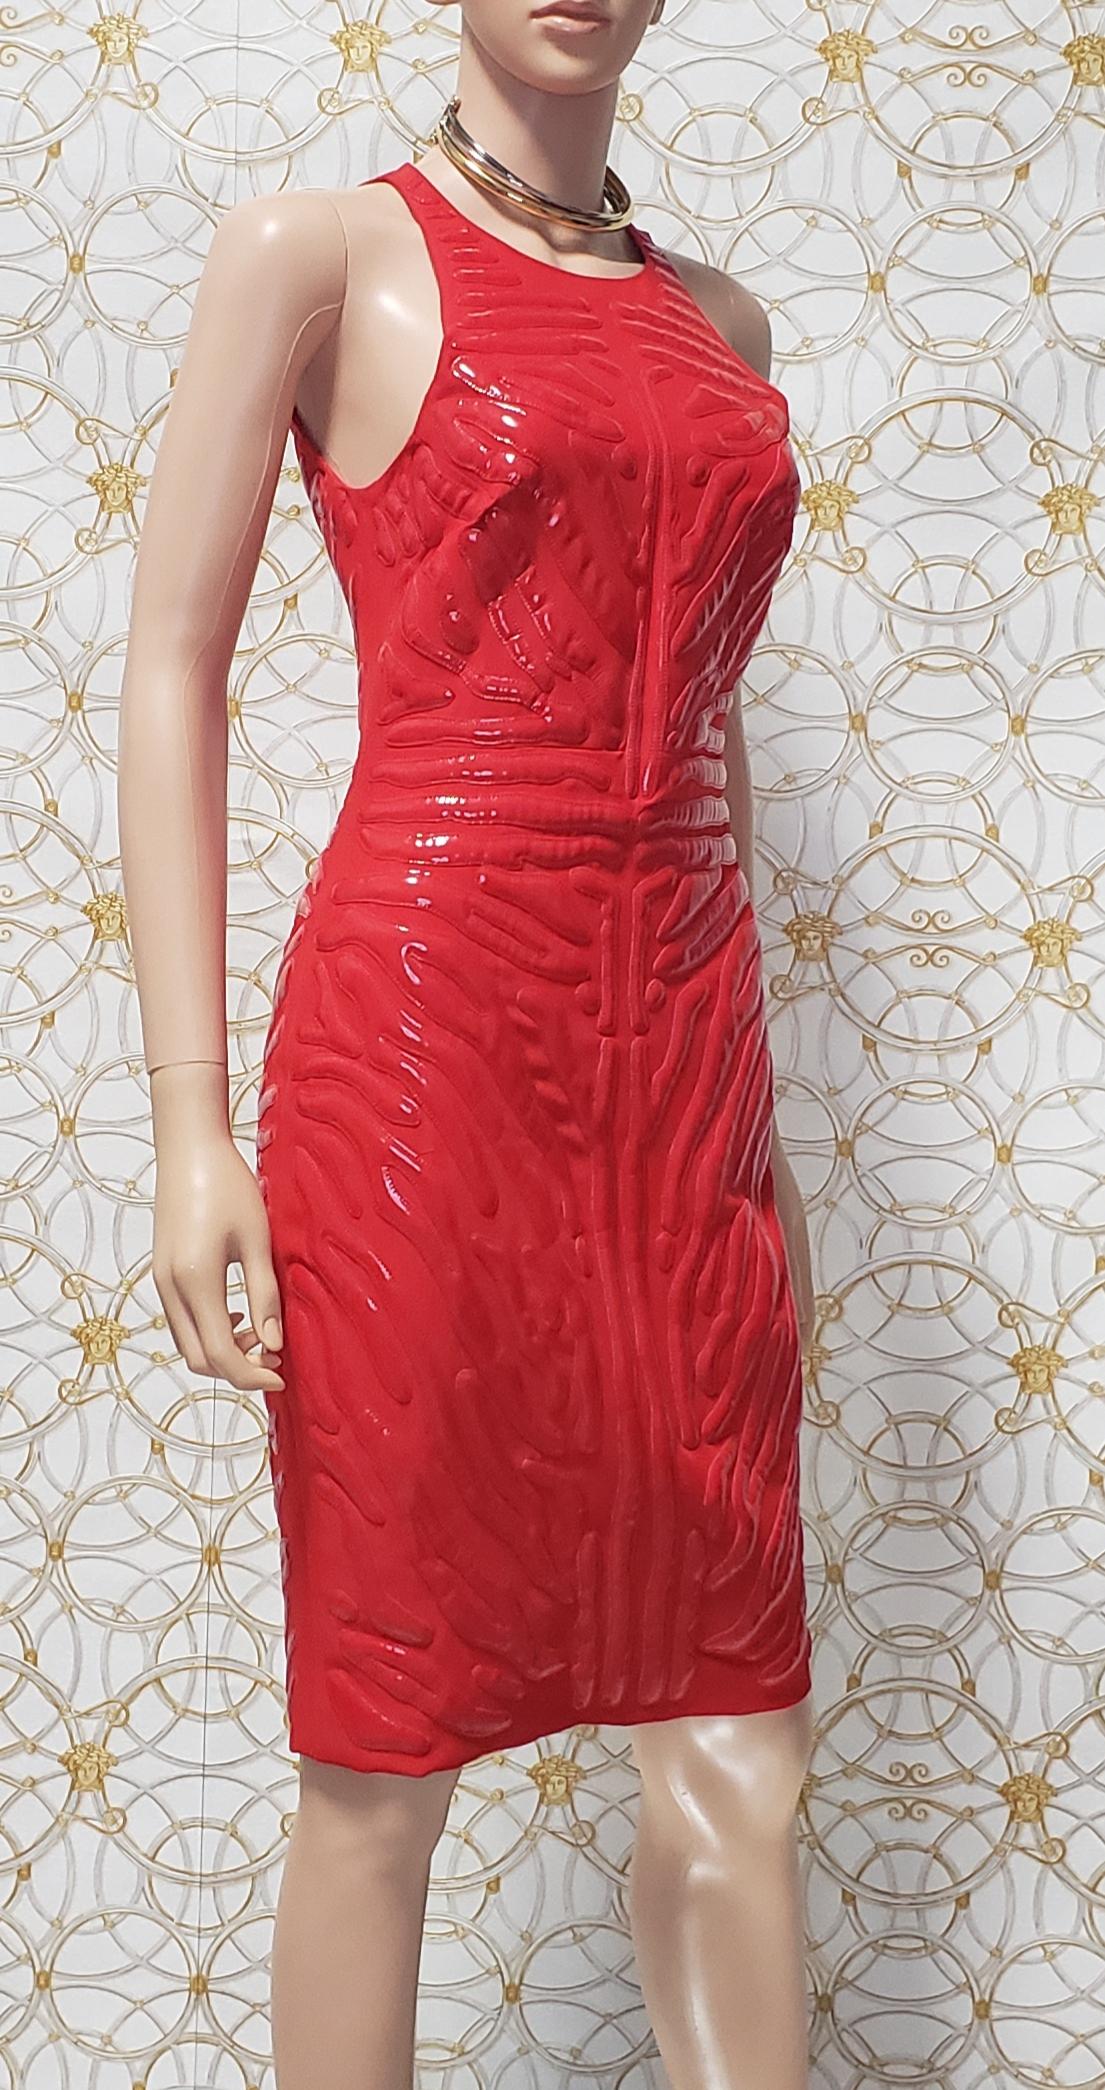 Versace Red Crepe Cady Sheath Dress With Vinyl Animal Stripes 40 - 4/6 For Sale 6